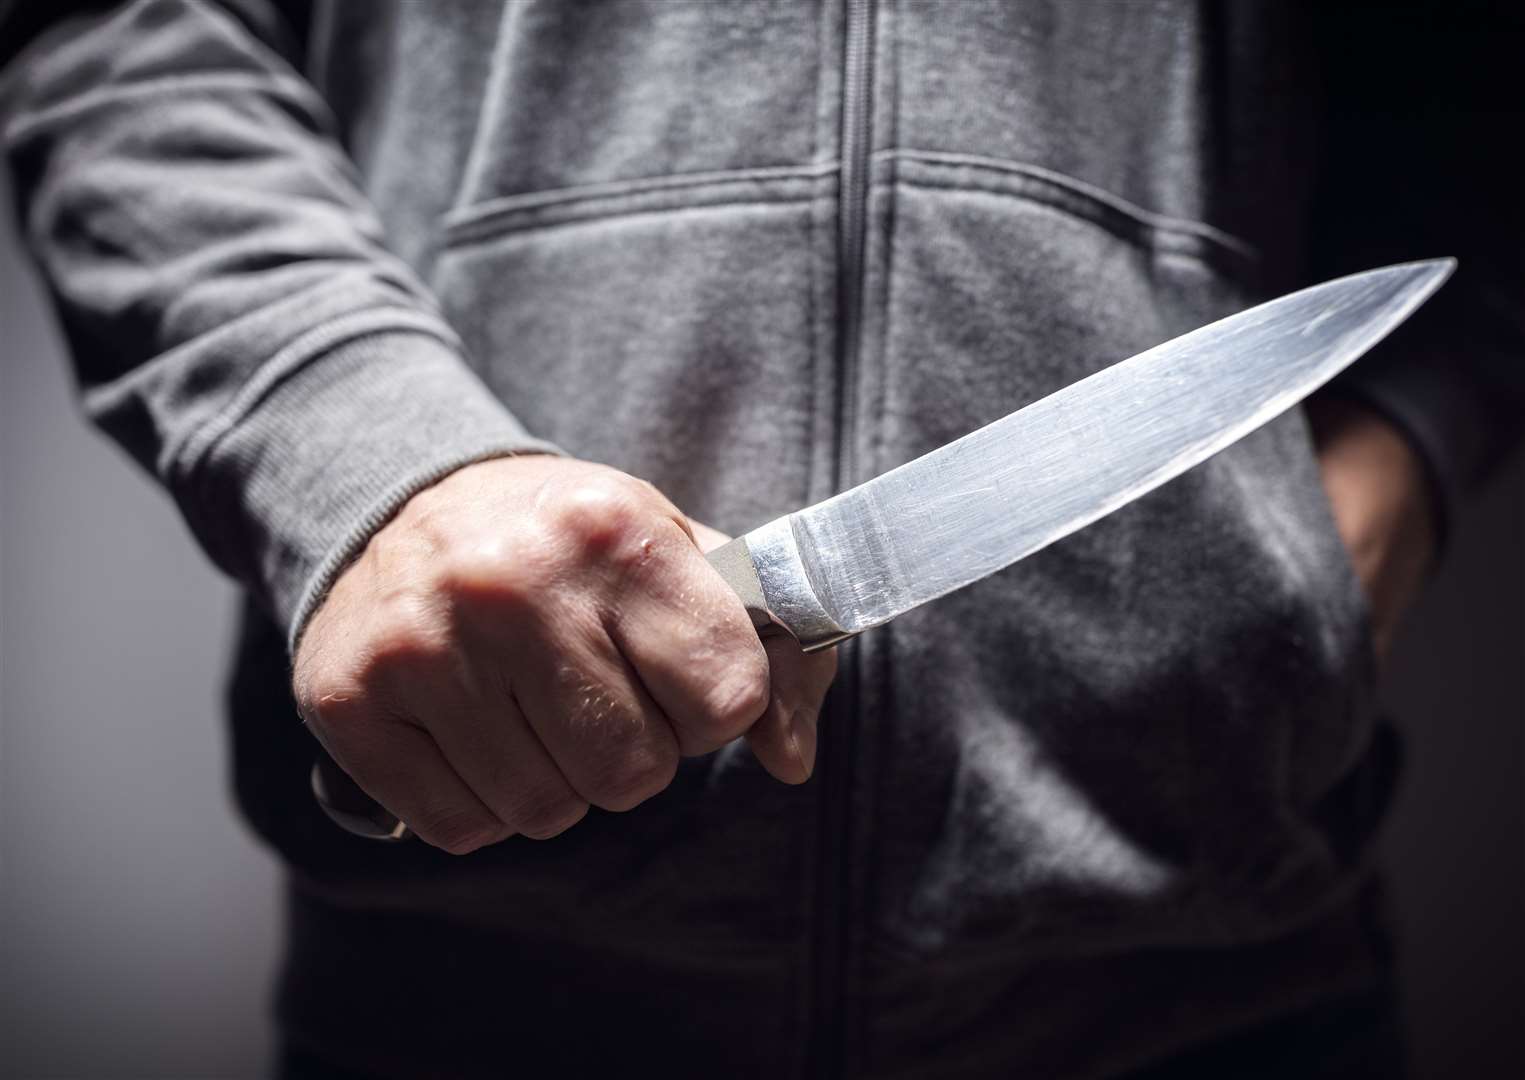 Scott Beasley planned to stab his former partner. Stock picture